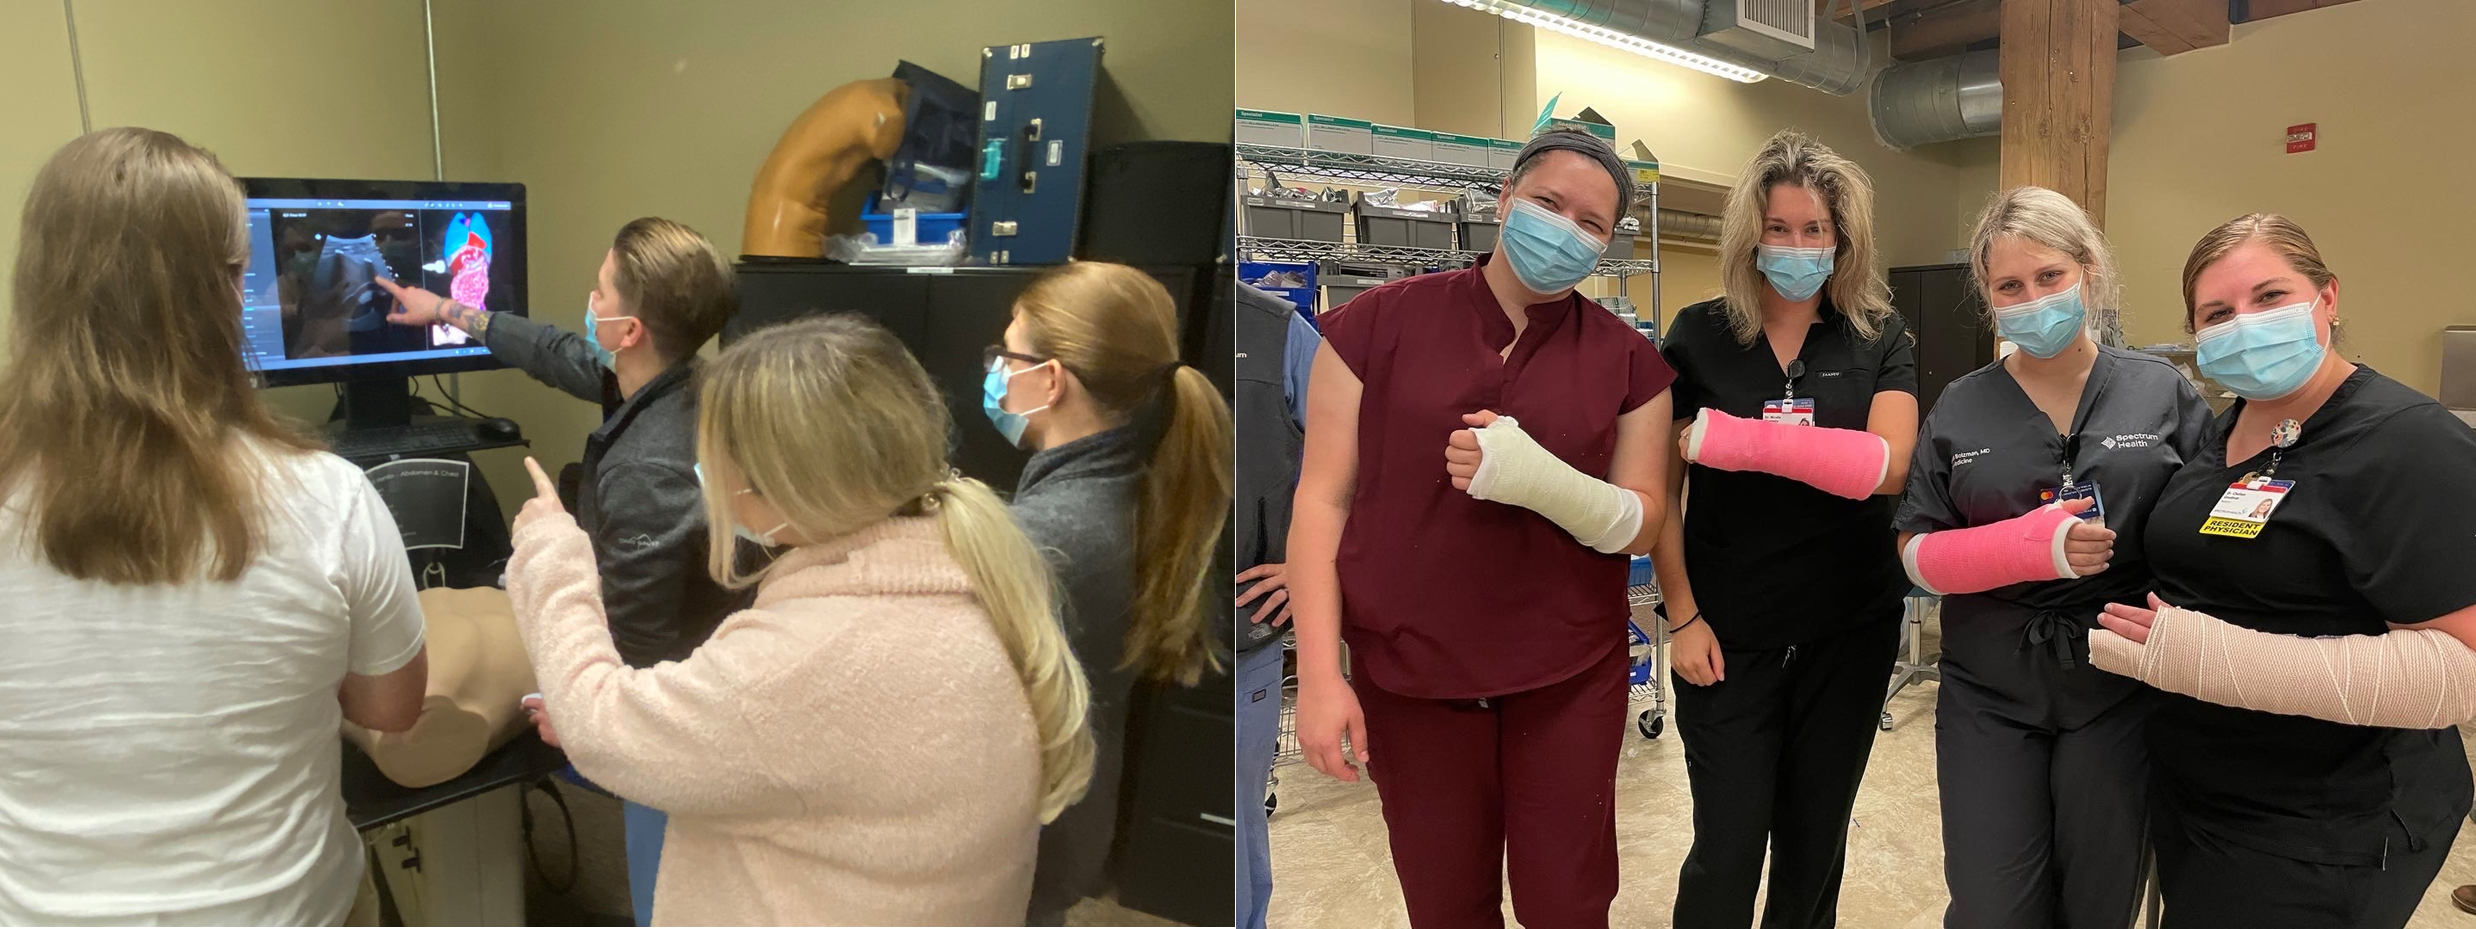 2 photos of residents learning to cast and in a sim lab